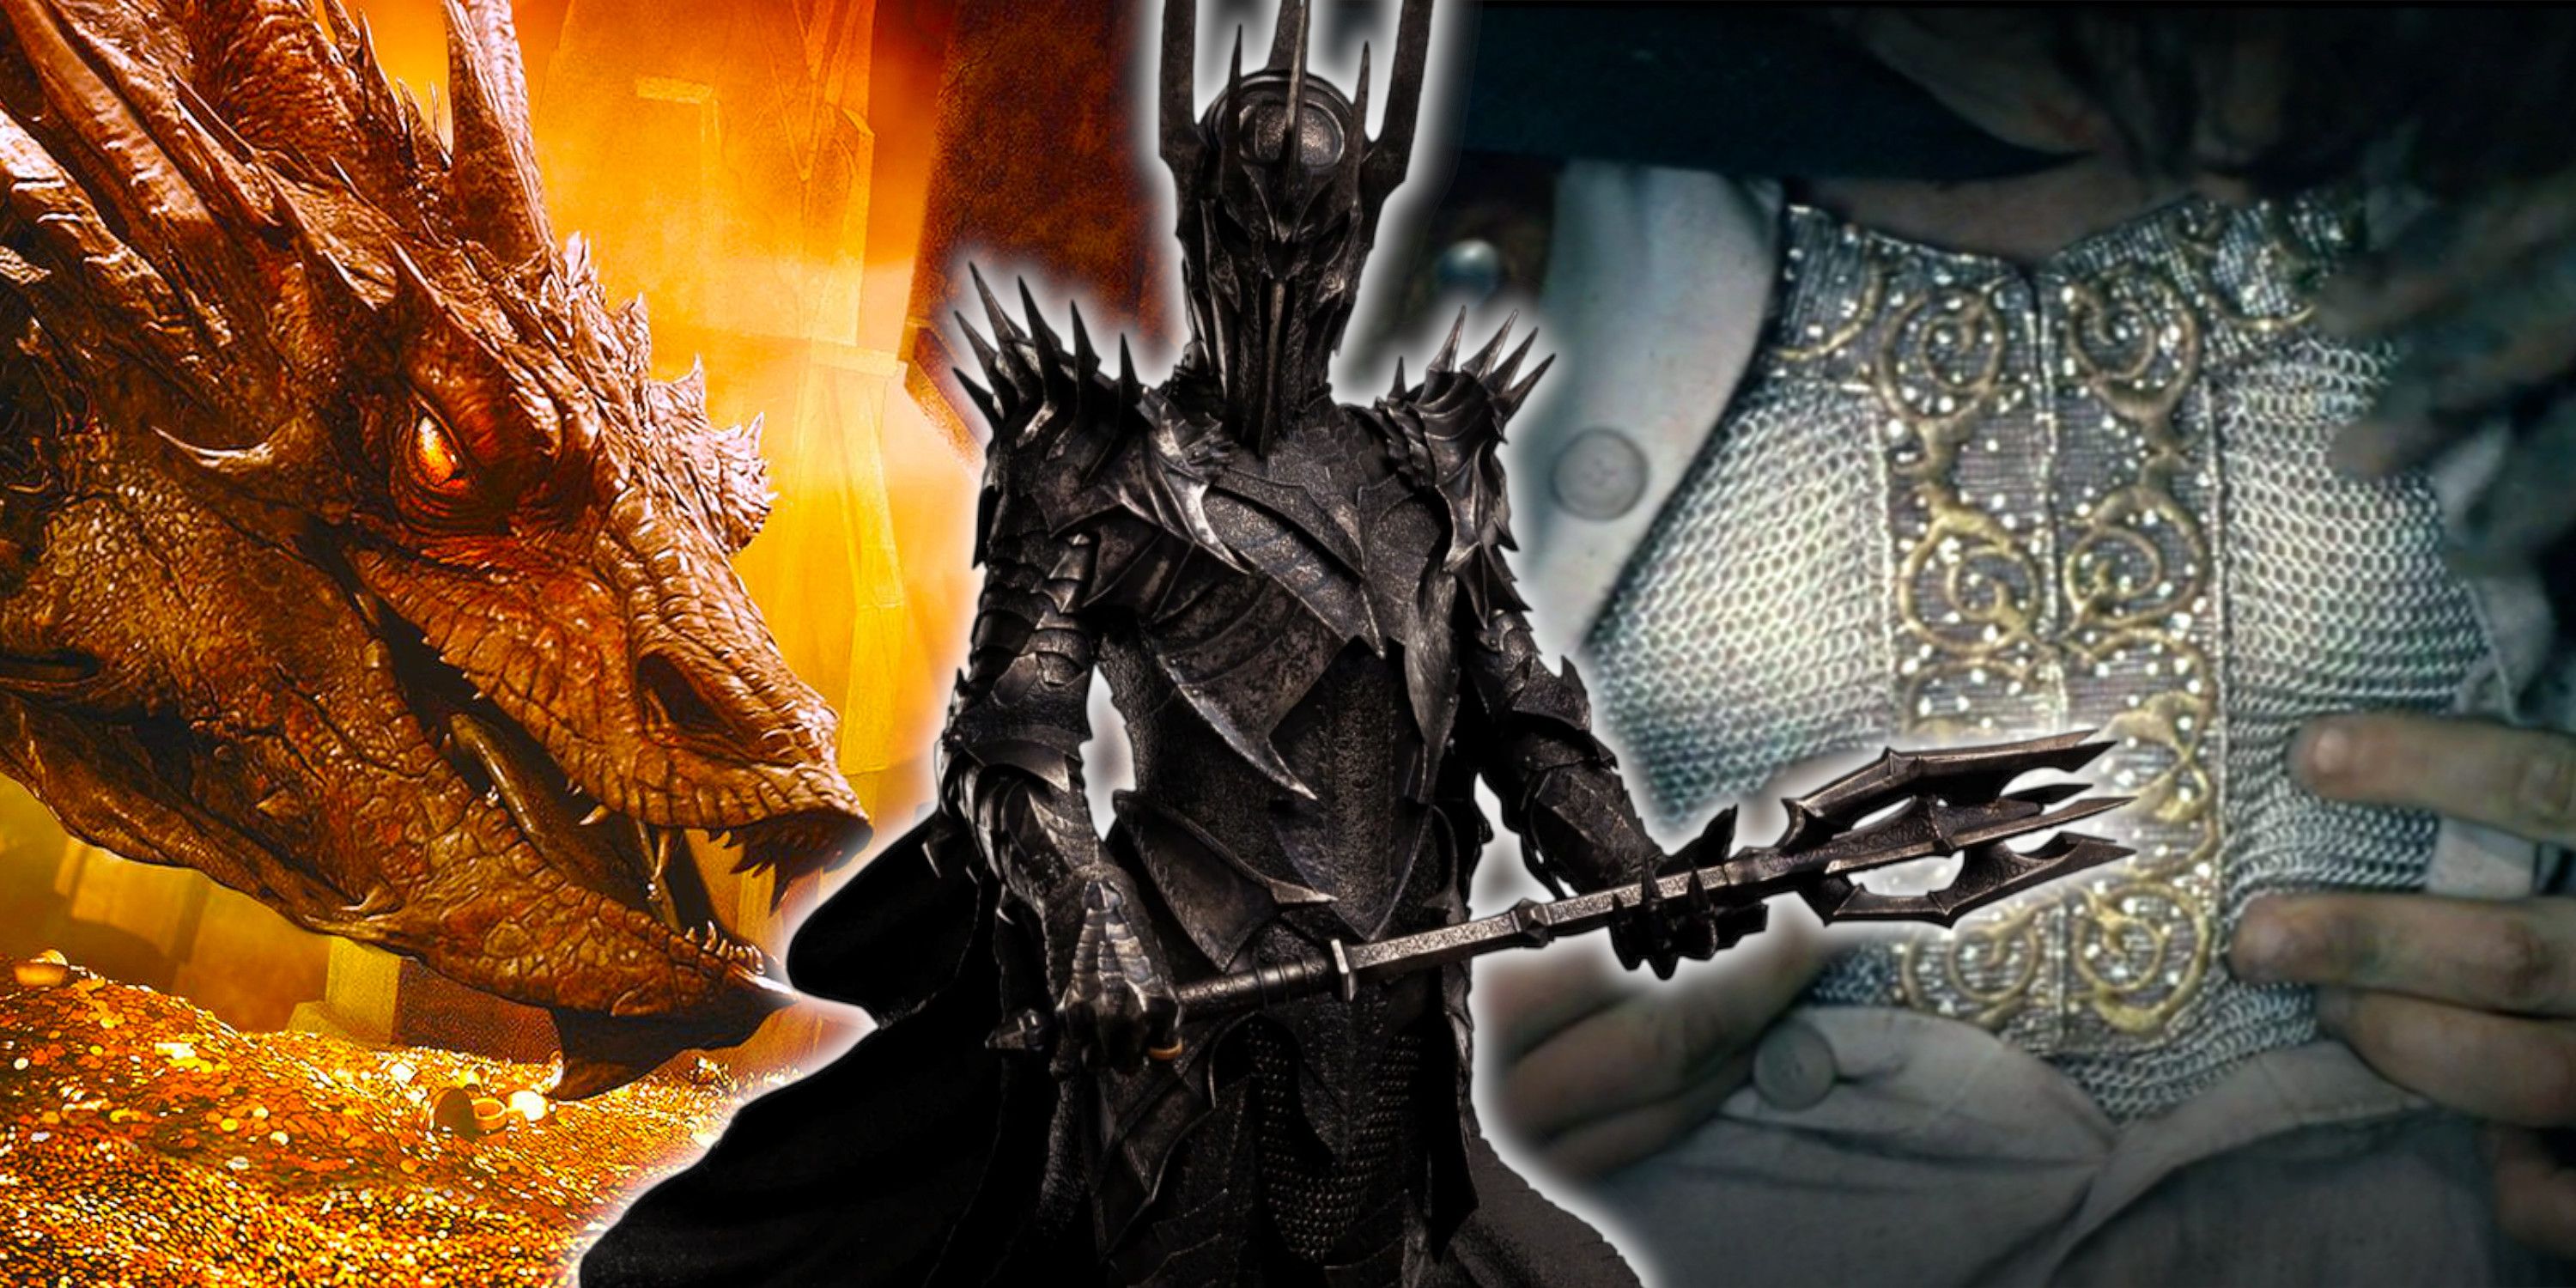 Sauron from The Lord of the Rings, Smaug from the Hobbit and Frodo's mithril shirt from The Lord of the Rings